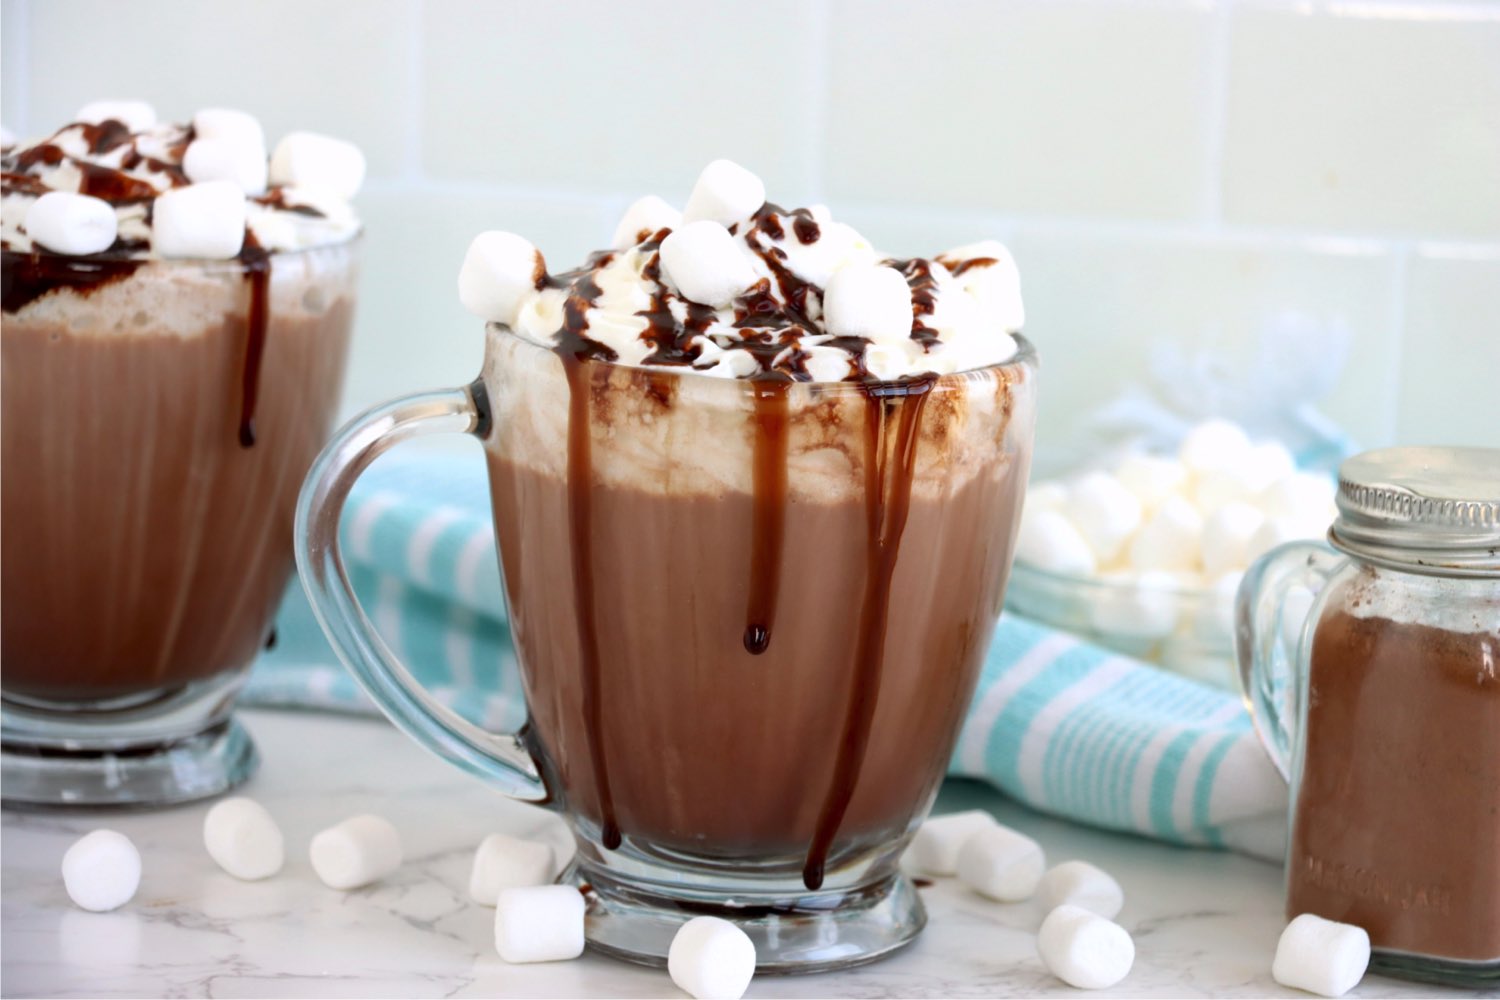 mugs of hot chocolate with toppings